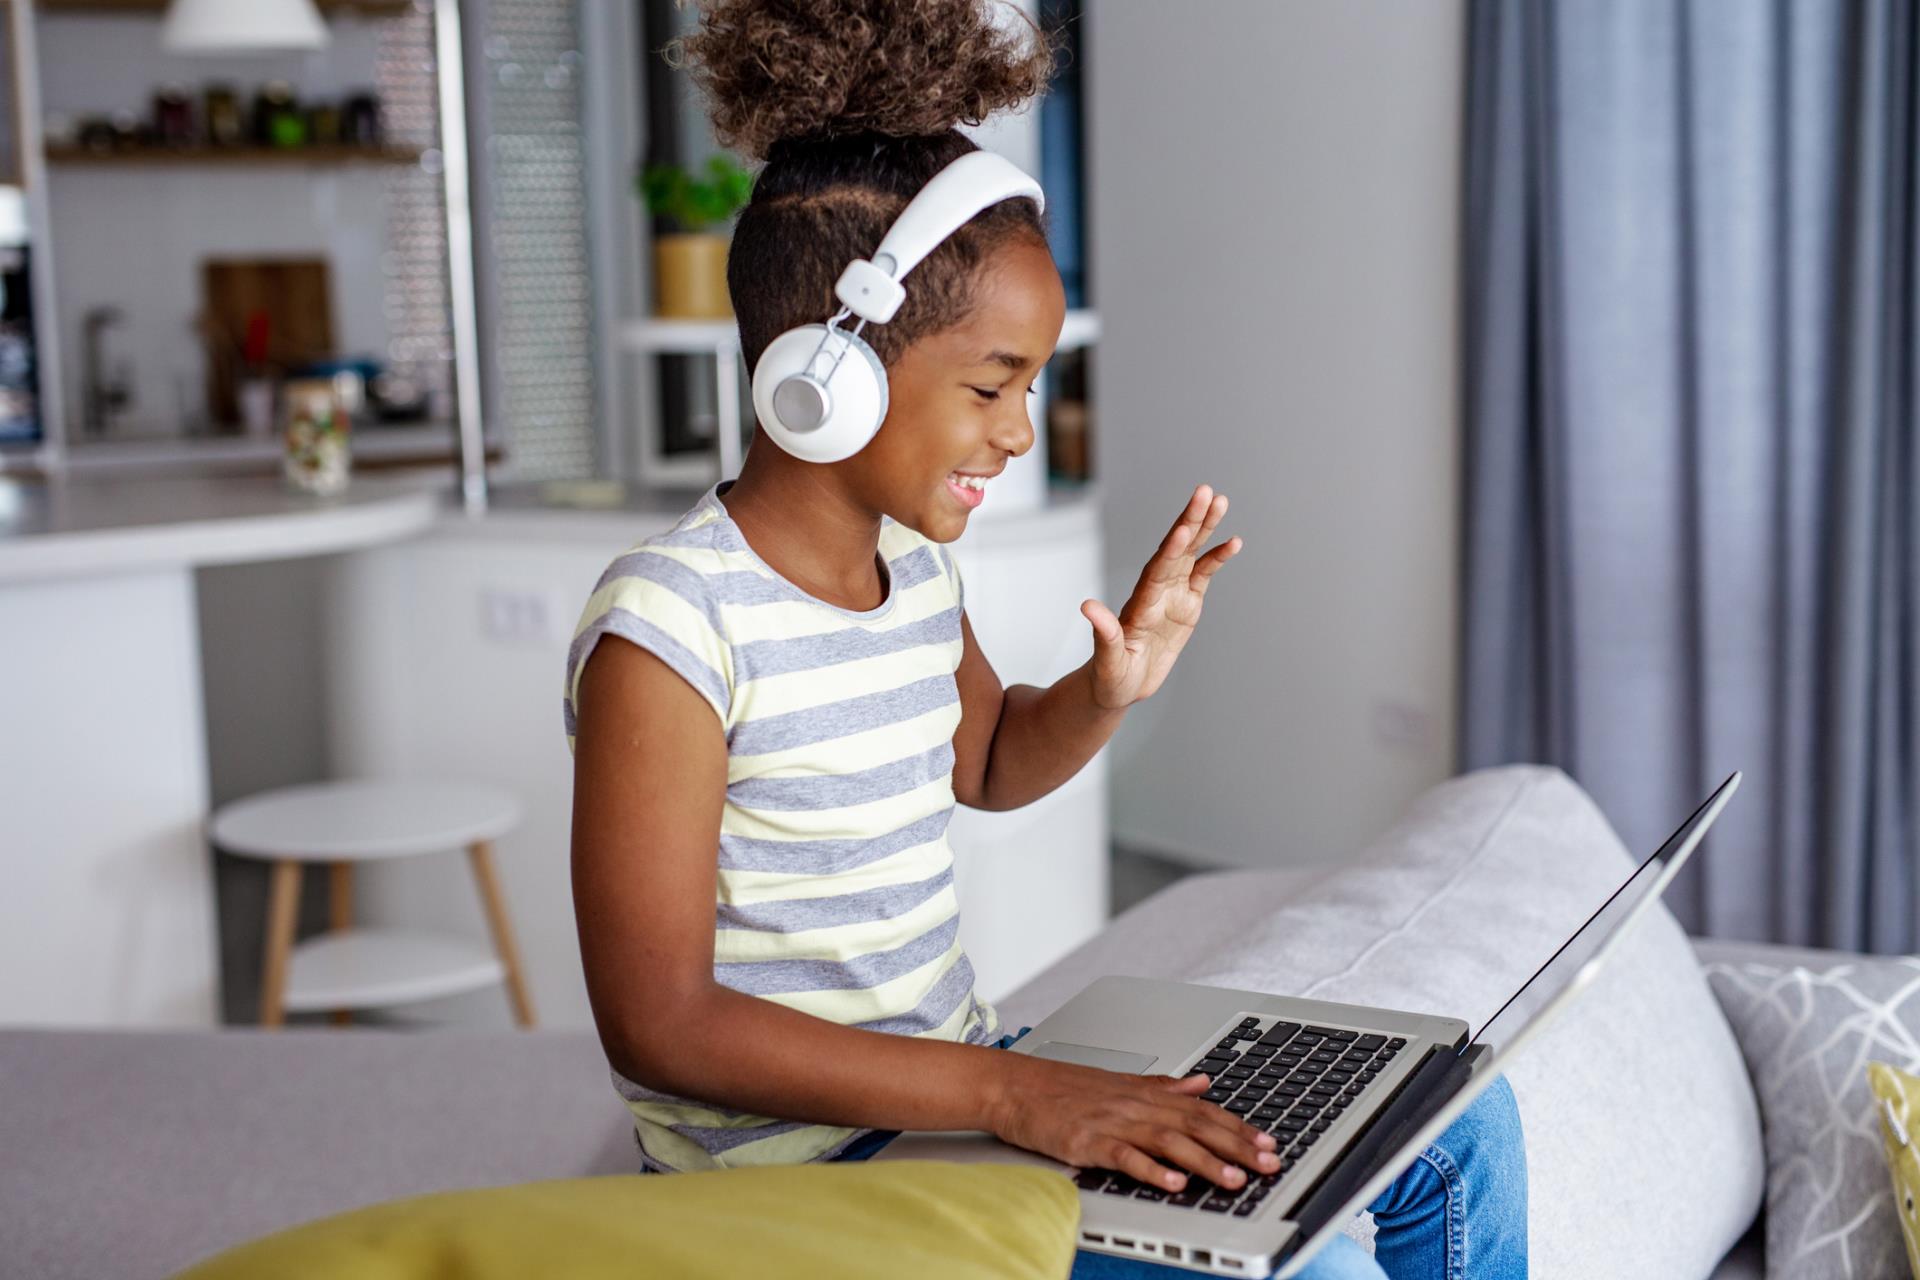 Student at home wearing headphones and waving at laptop in her lap